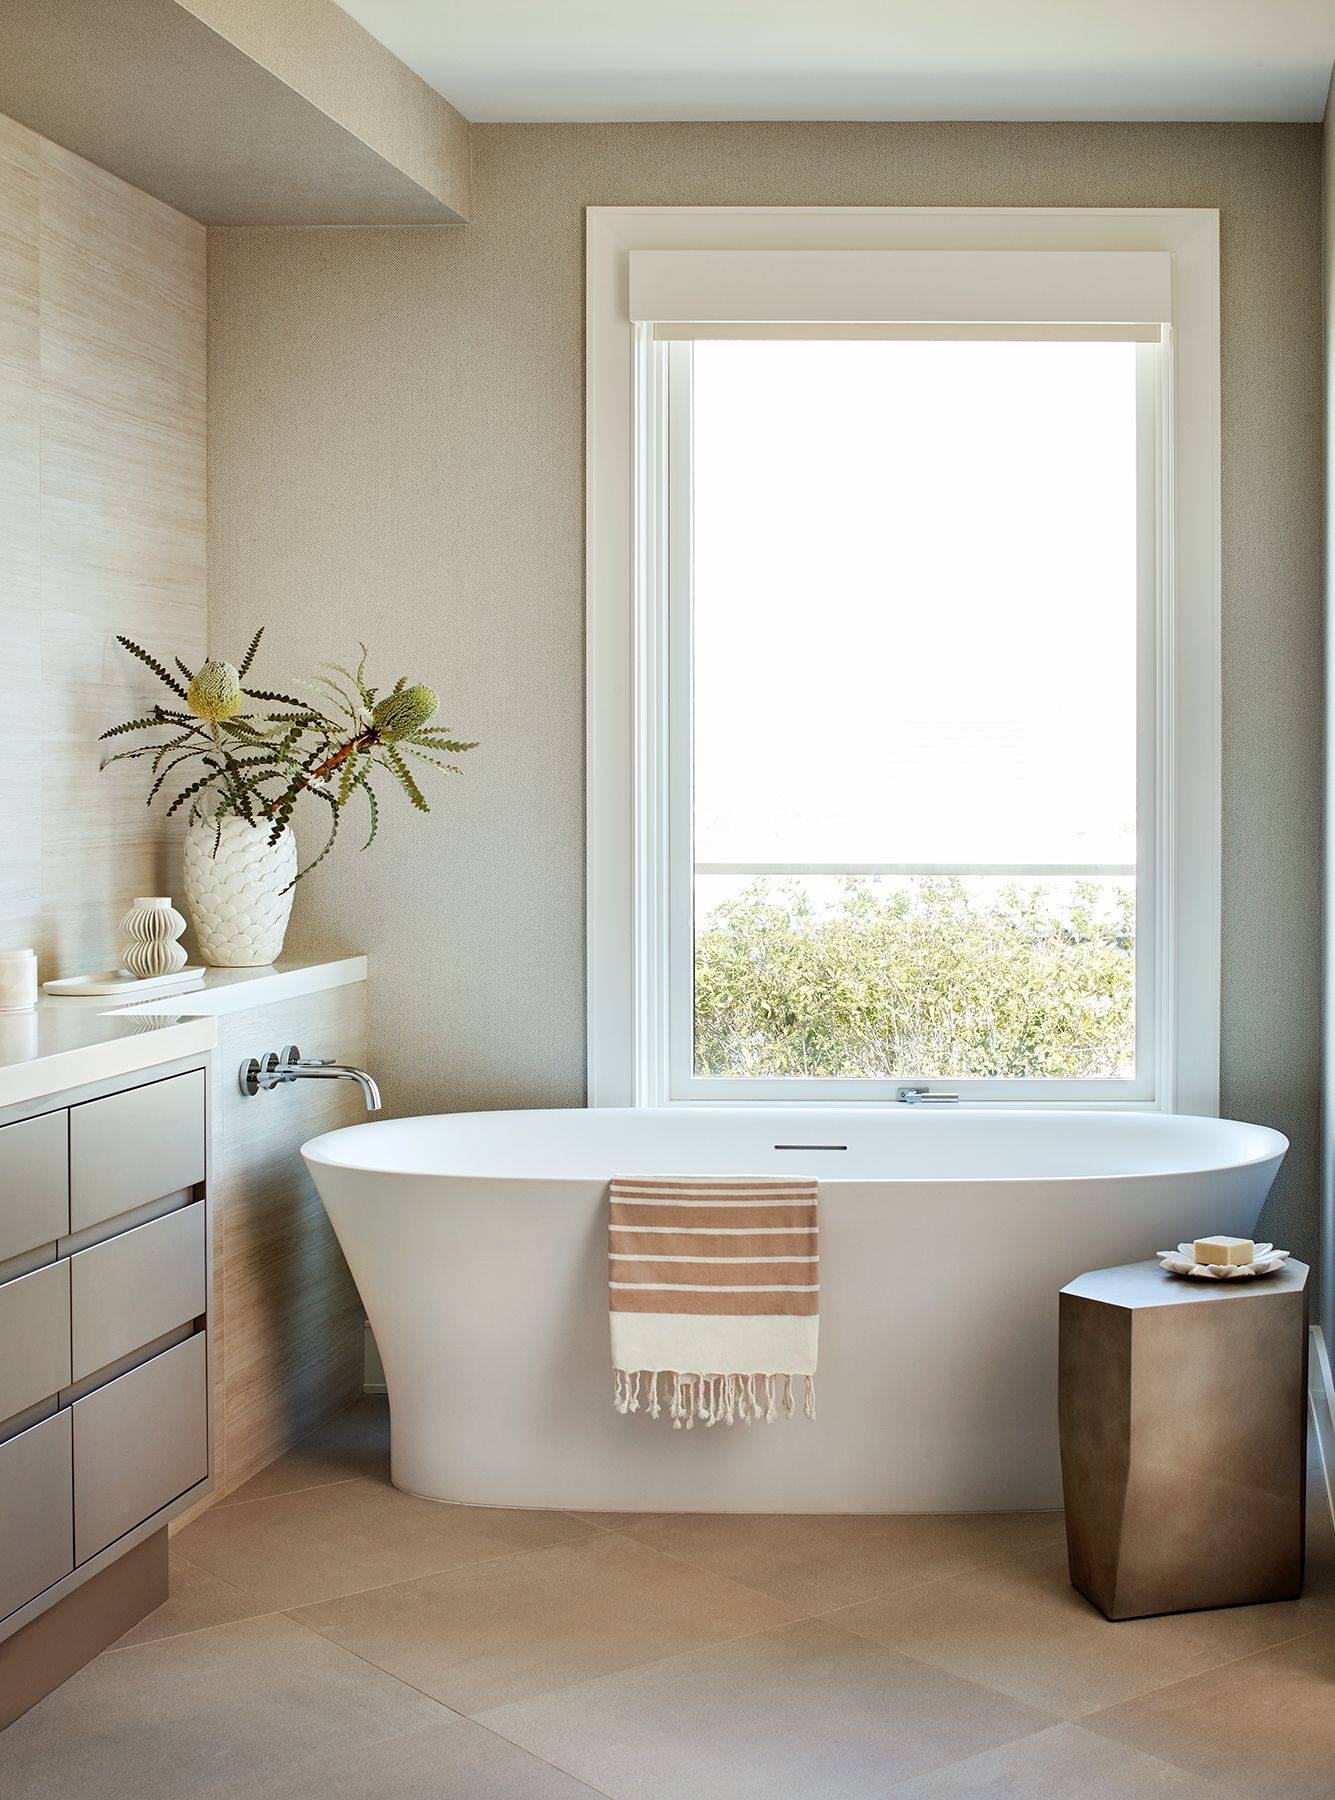 20 Top Bathroom Trends for 2023, According to Design Experts